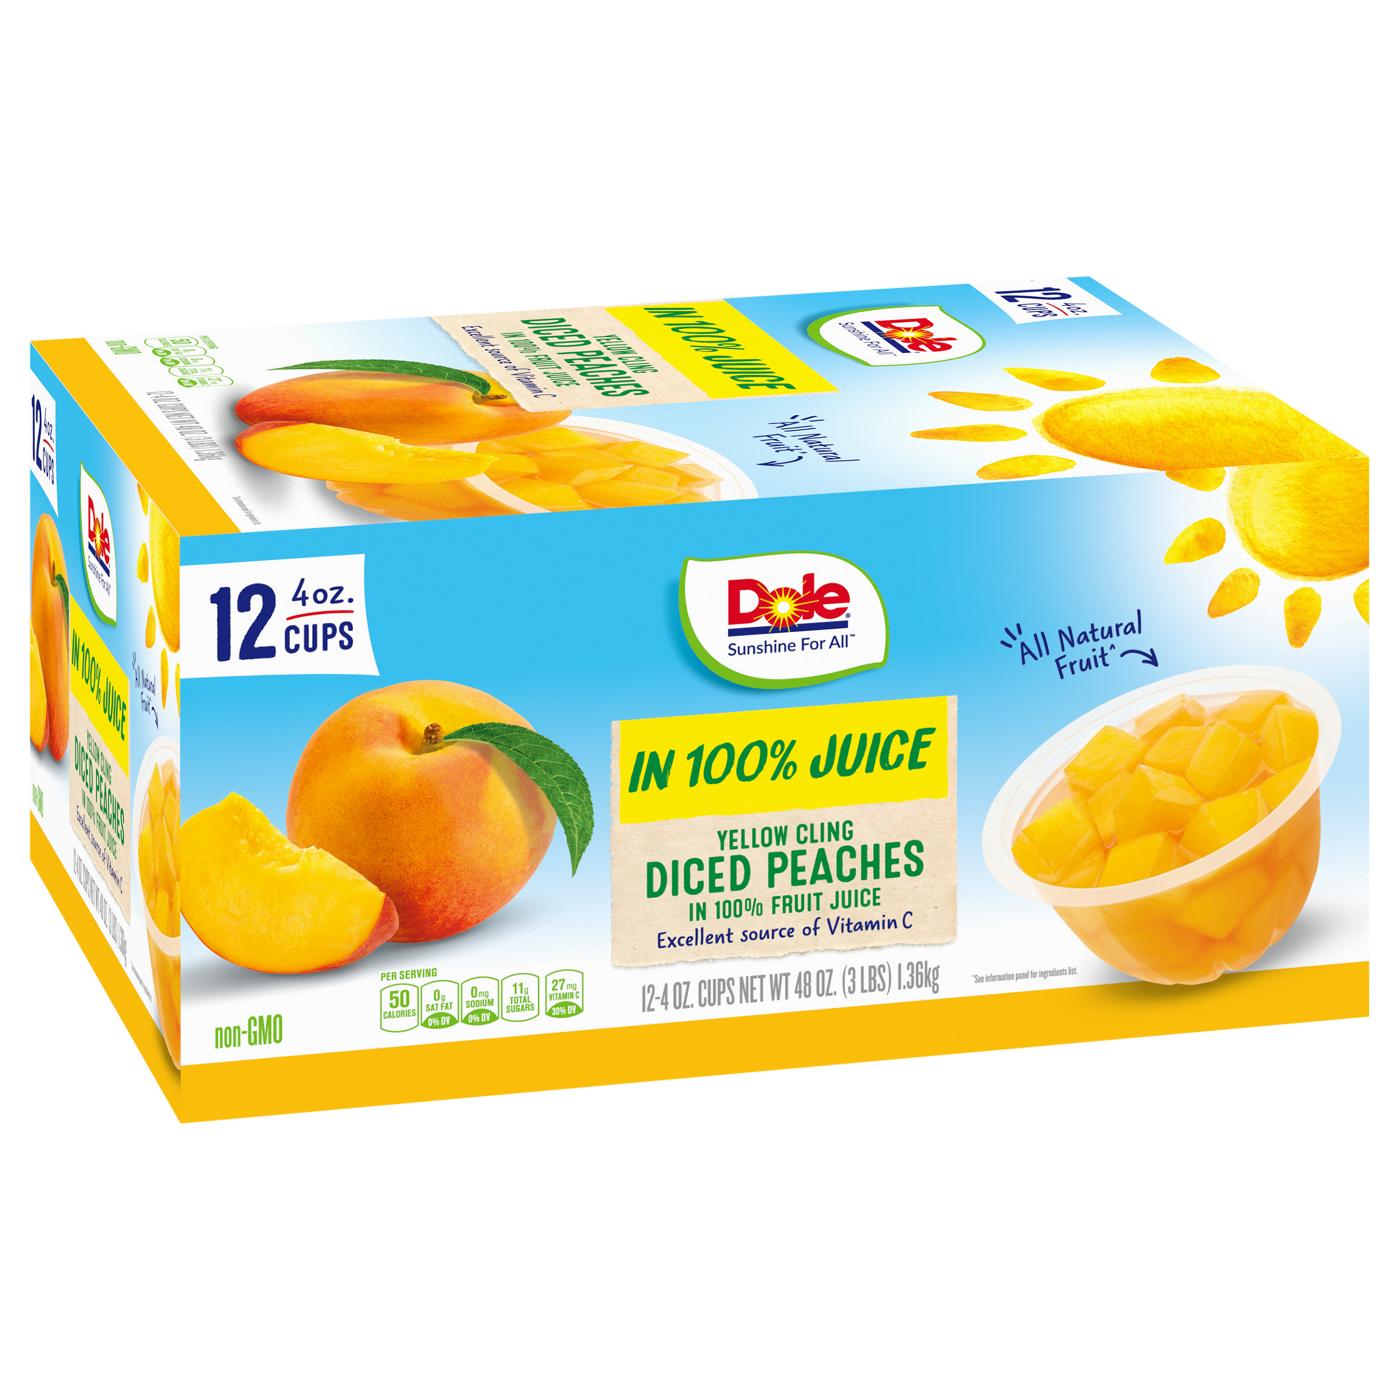 Dole Fruit Bowls - Diced Peaches in 100% Juice; image 6 of 8